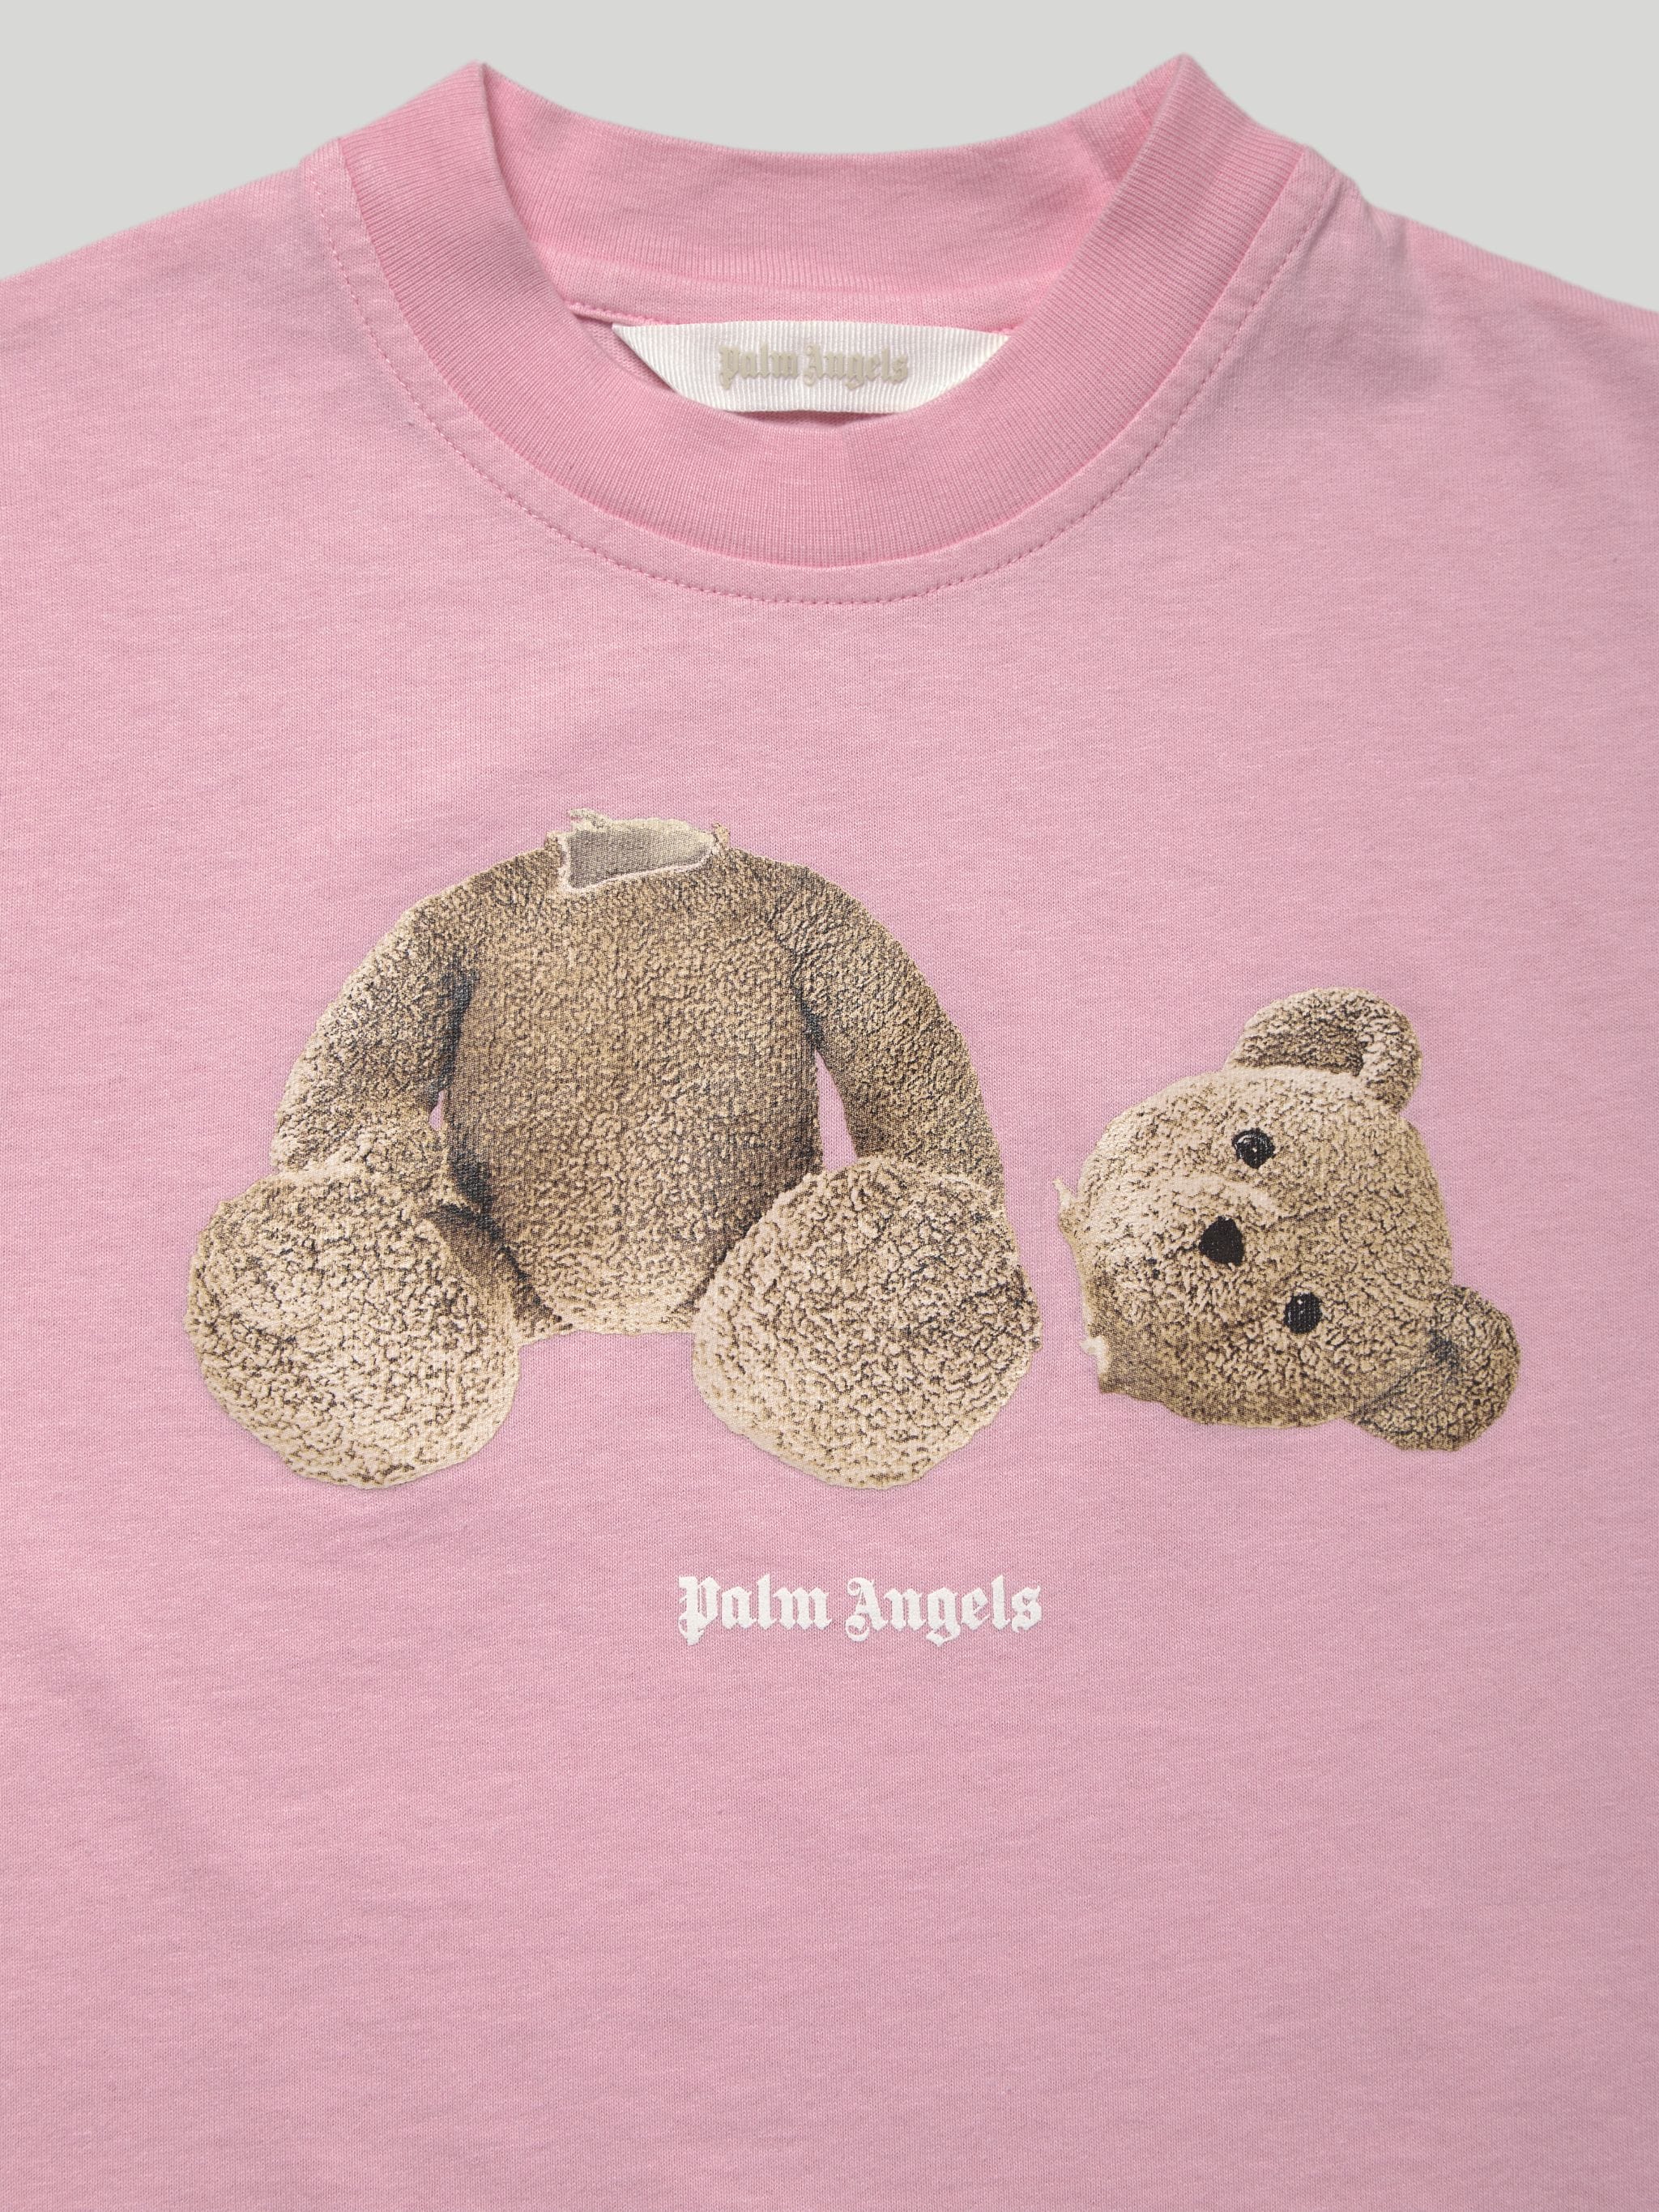 PALM ANGELS BEAR T-SHIRT in pink - Palm Angels® Official